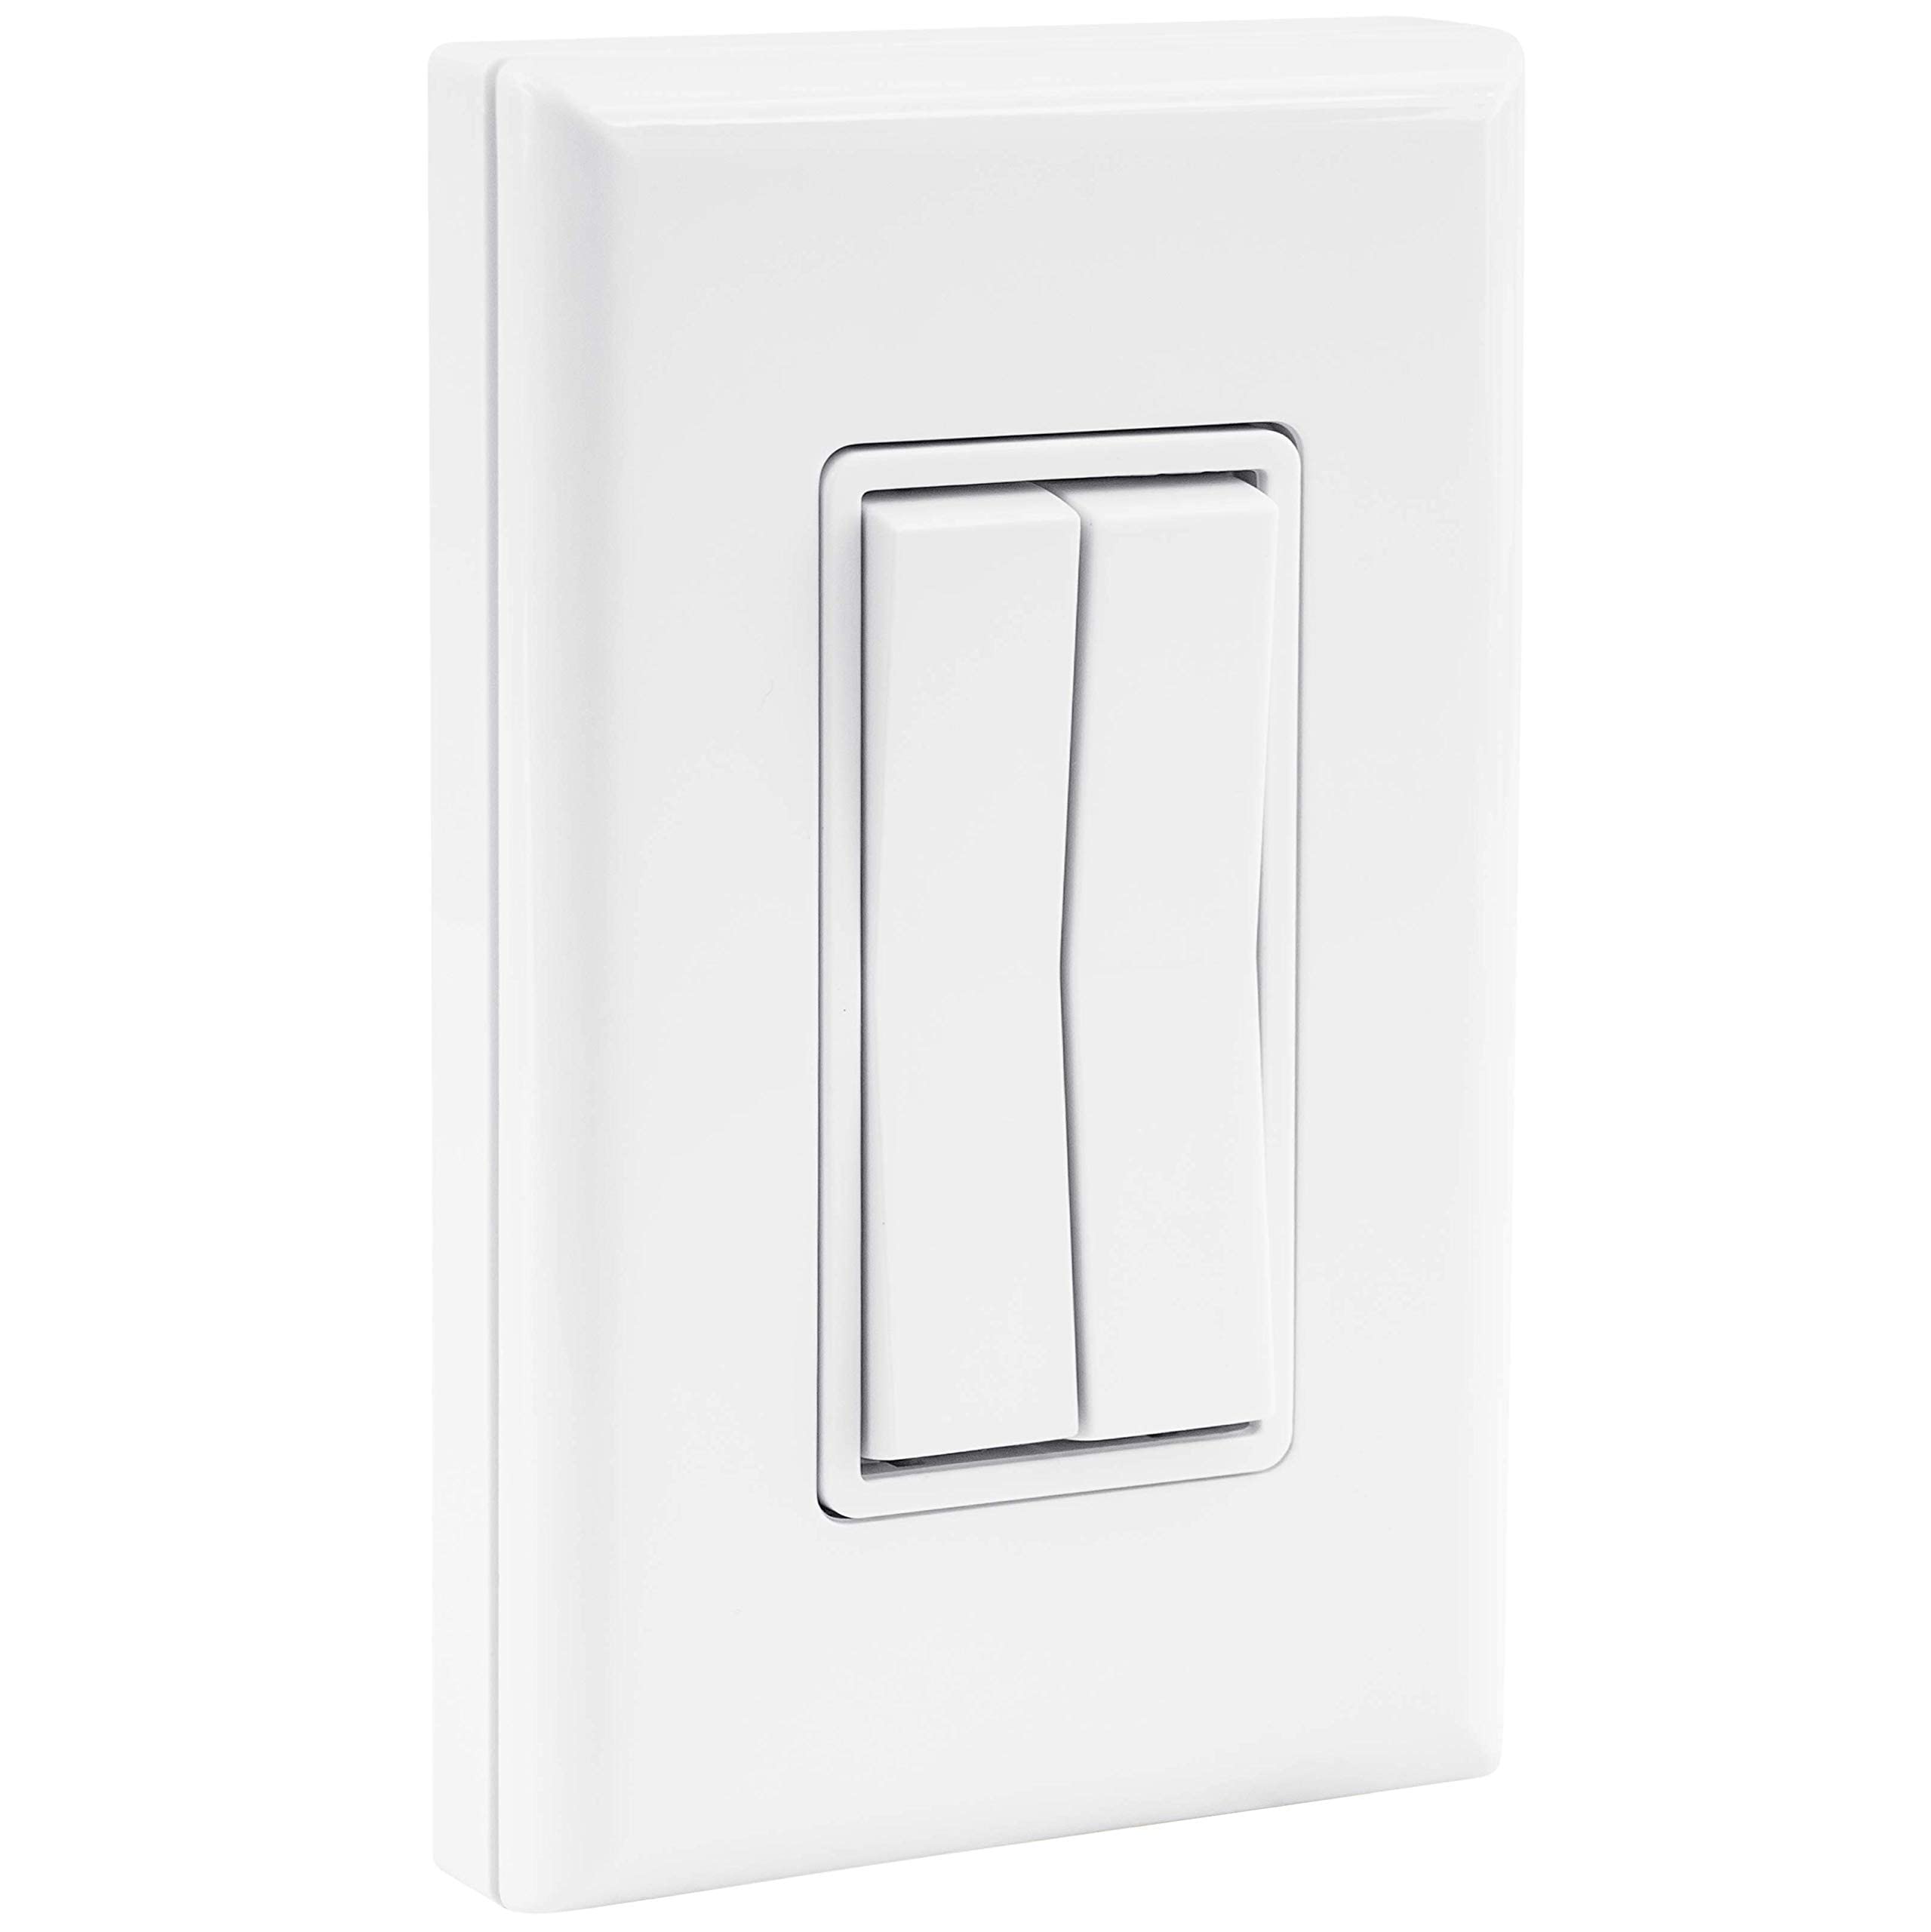 Book Cover RunLessWire Click for Philips Hue Wireless Dimmer Light Switch, Smart Switch with Battery-Free Installation (Switch, White)